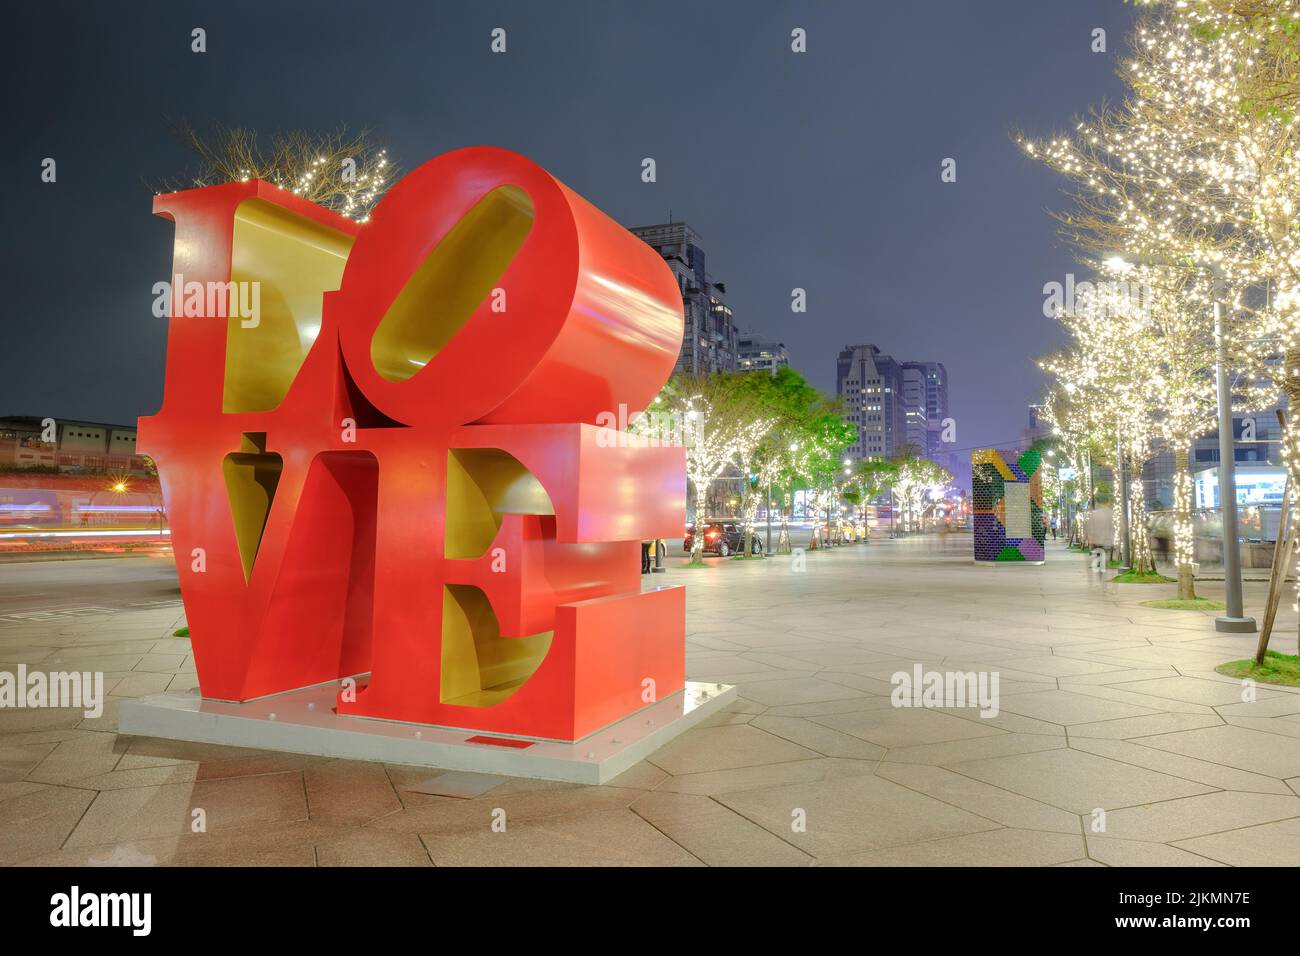 The Love sculpture with illuminated trees in the park at night. New York, USA. Stock Photo